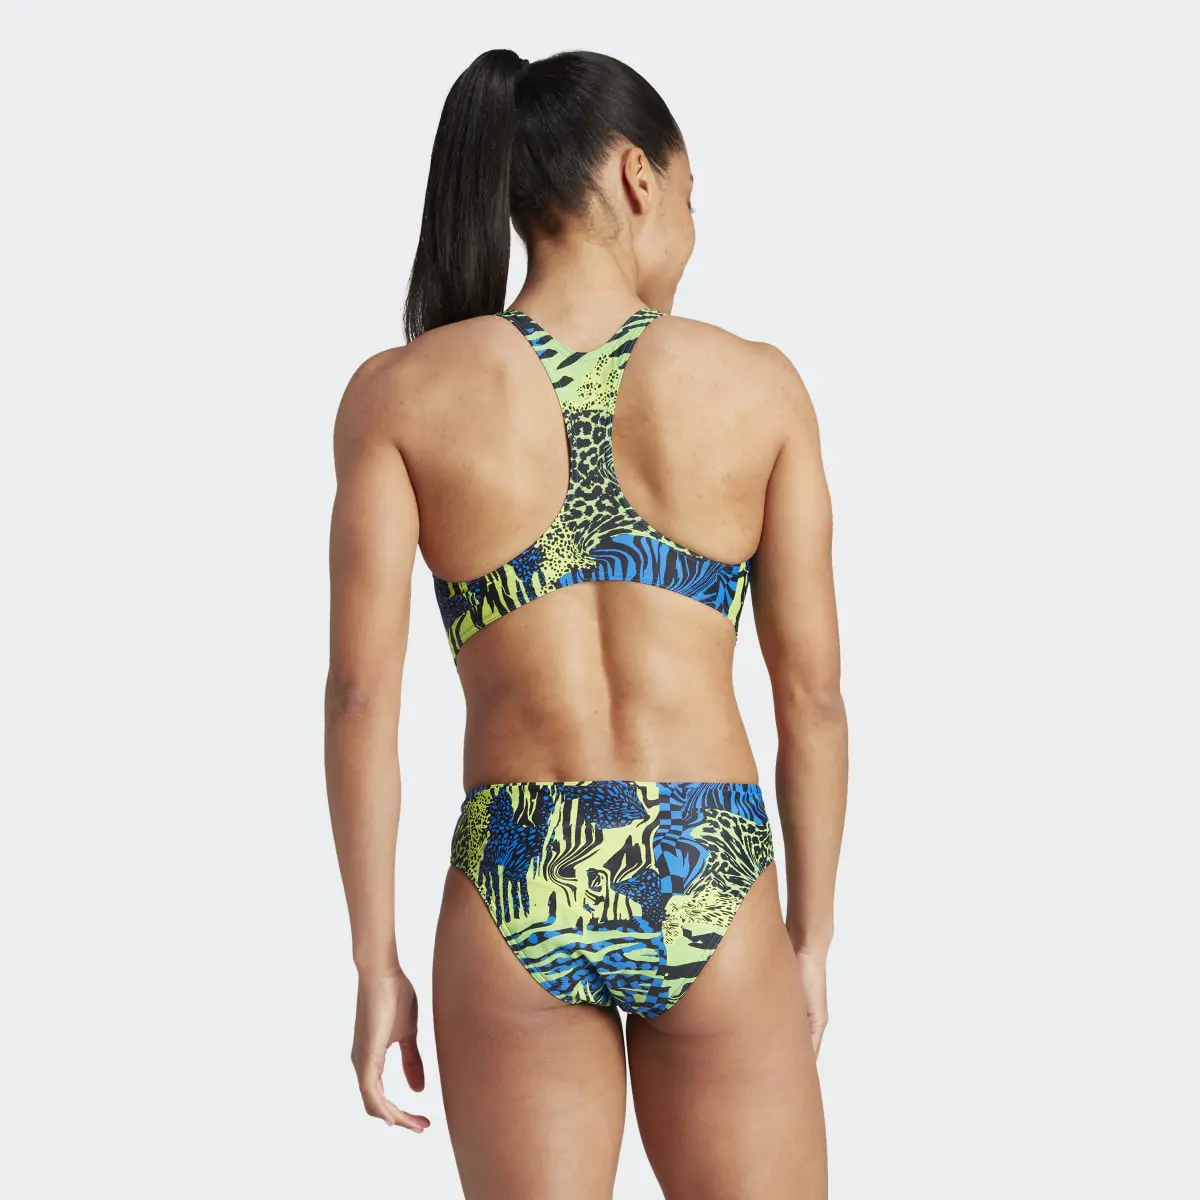 Adidas Allover Graphic Swimsuit. 3